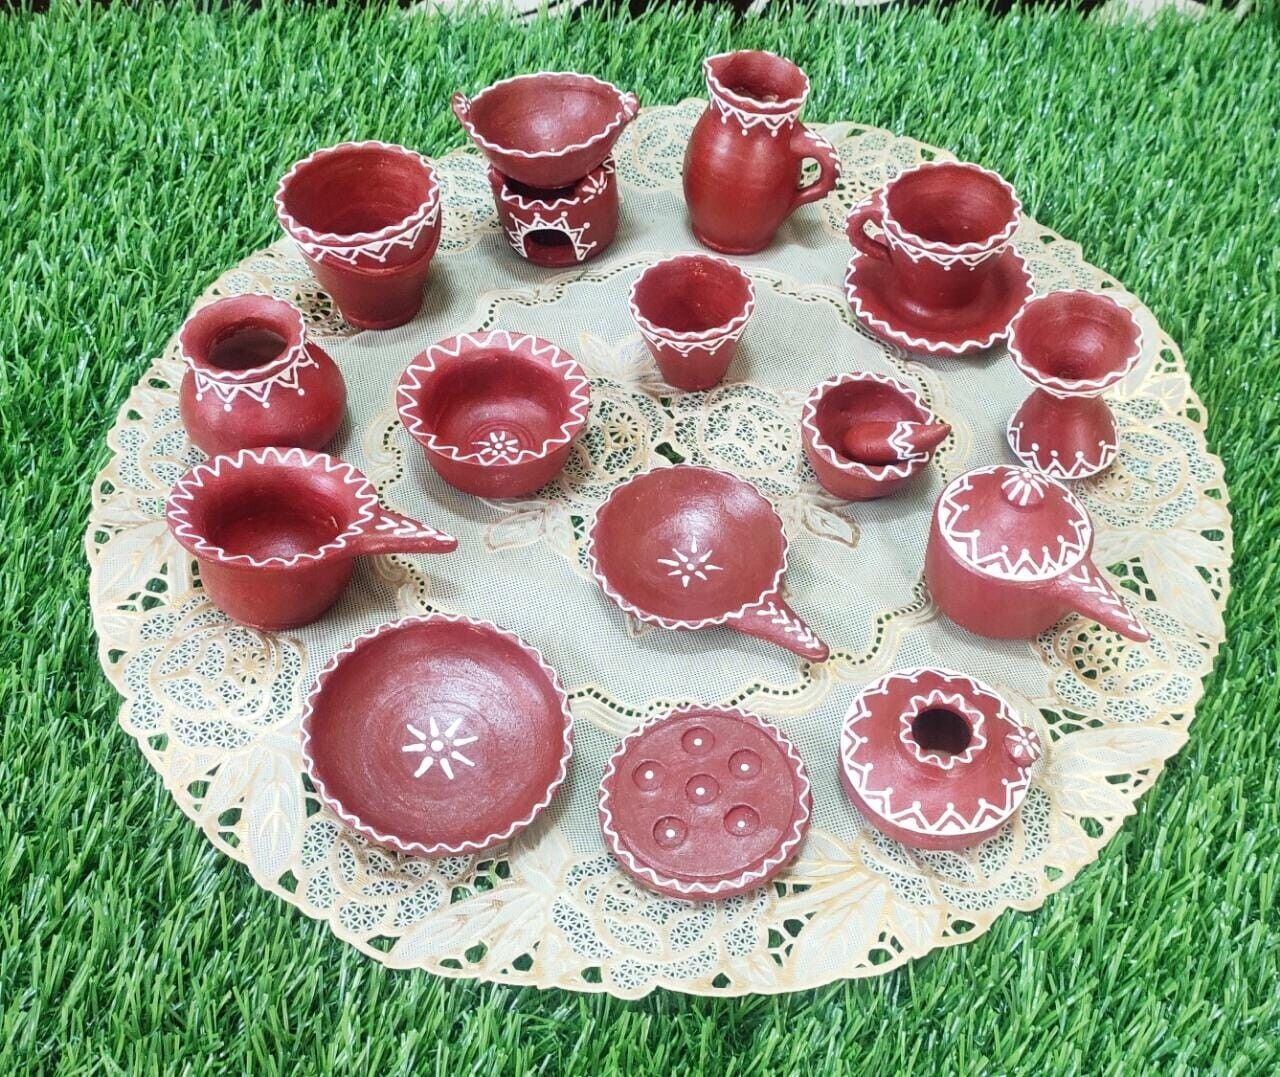 Handcrafted Brown Colored Terracotta Clay Miniature Kitchen For Kids Set of 16